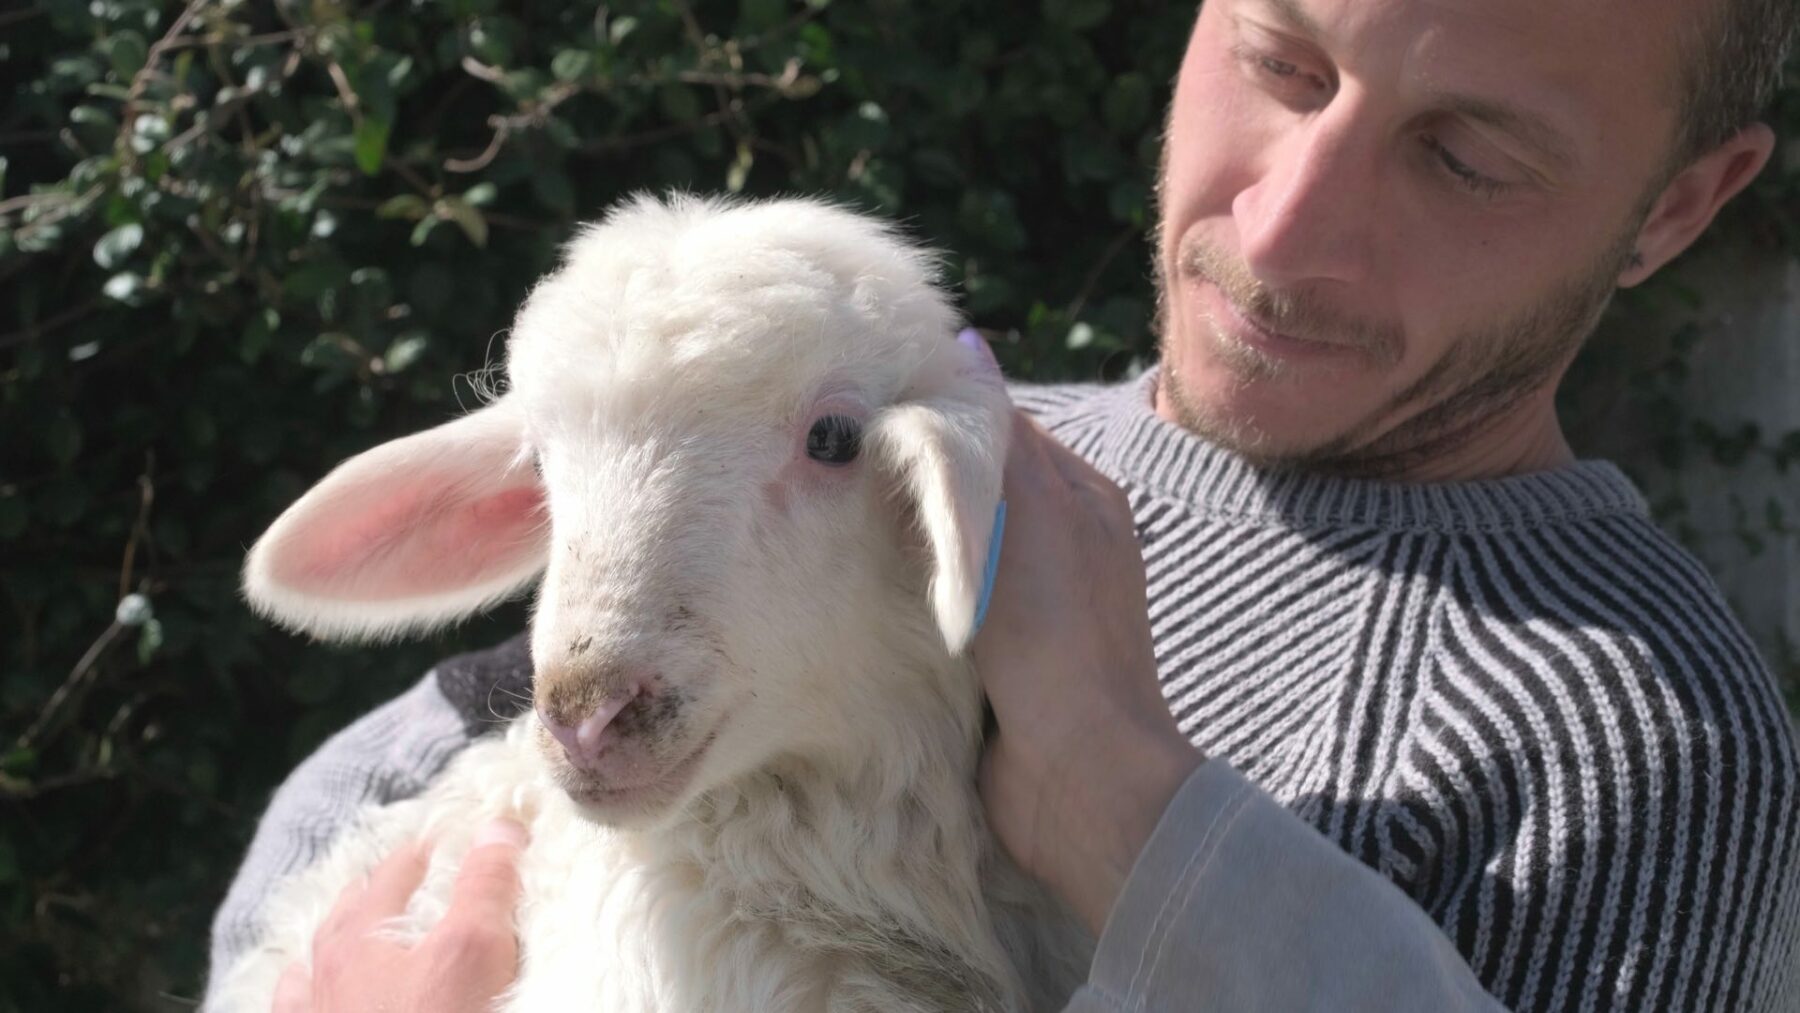 Rescuing a lamb from the slaughterhouse before Easter